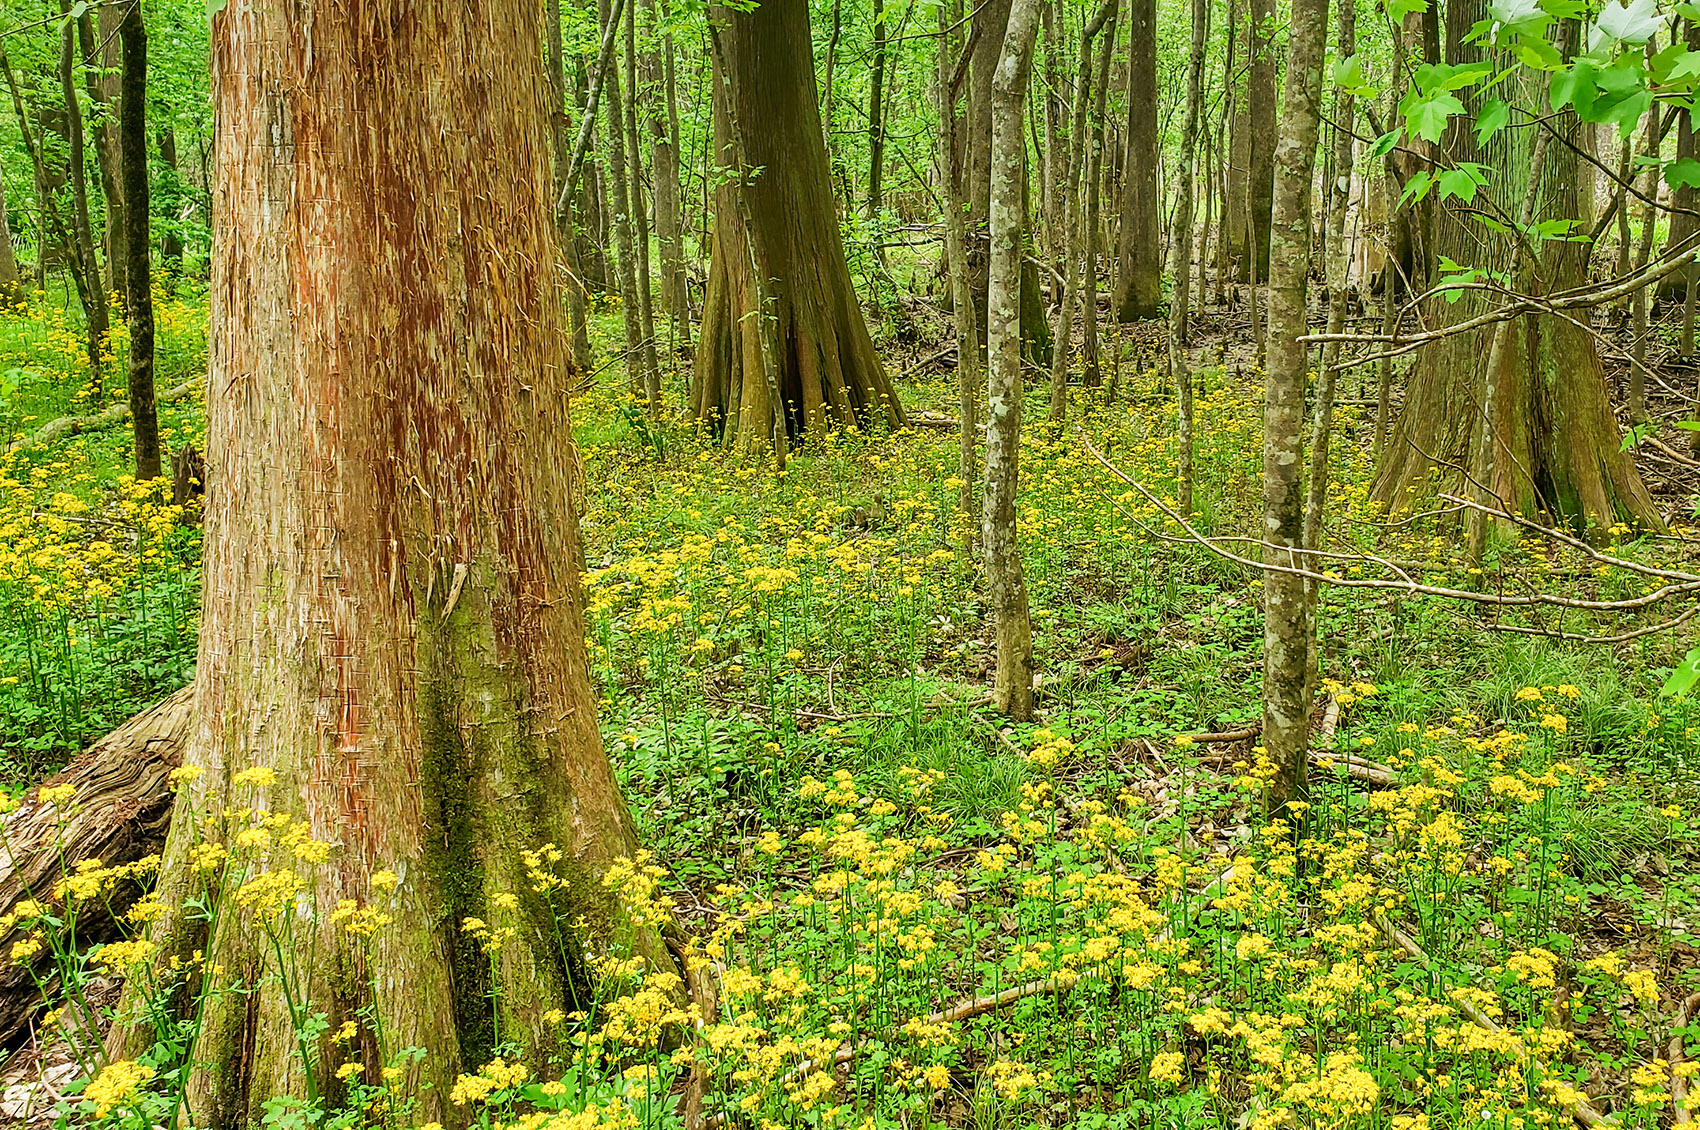 yellow flowers surround cypress tree trunks along nature trail at Louisiana state arboretum at Chicot State Park